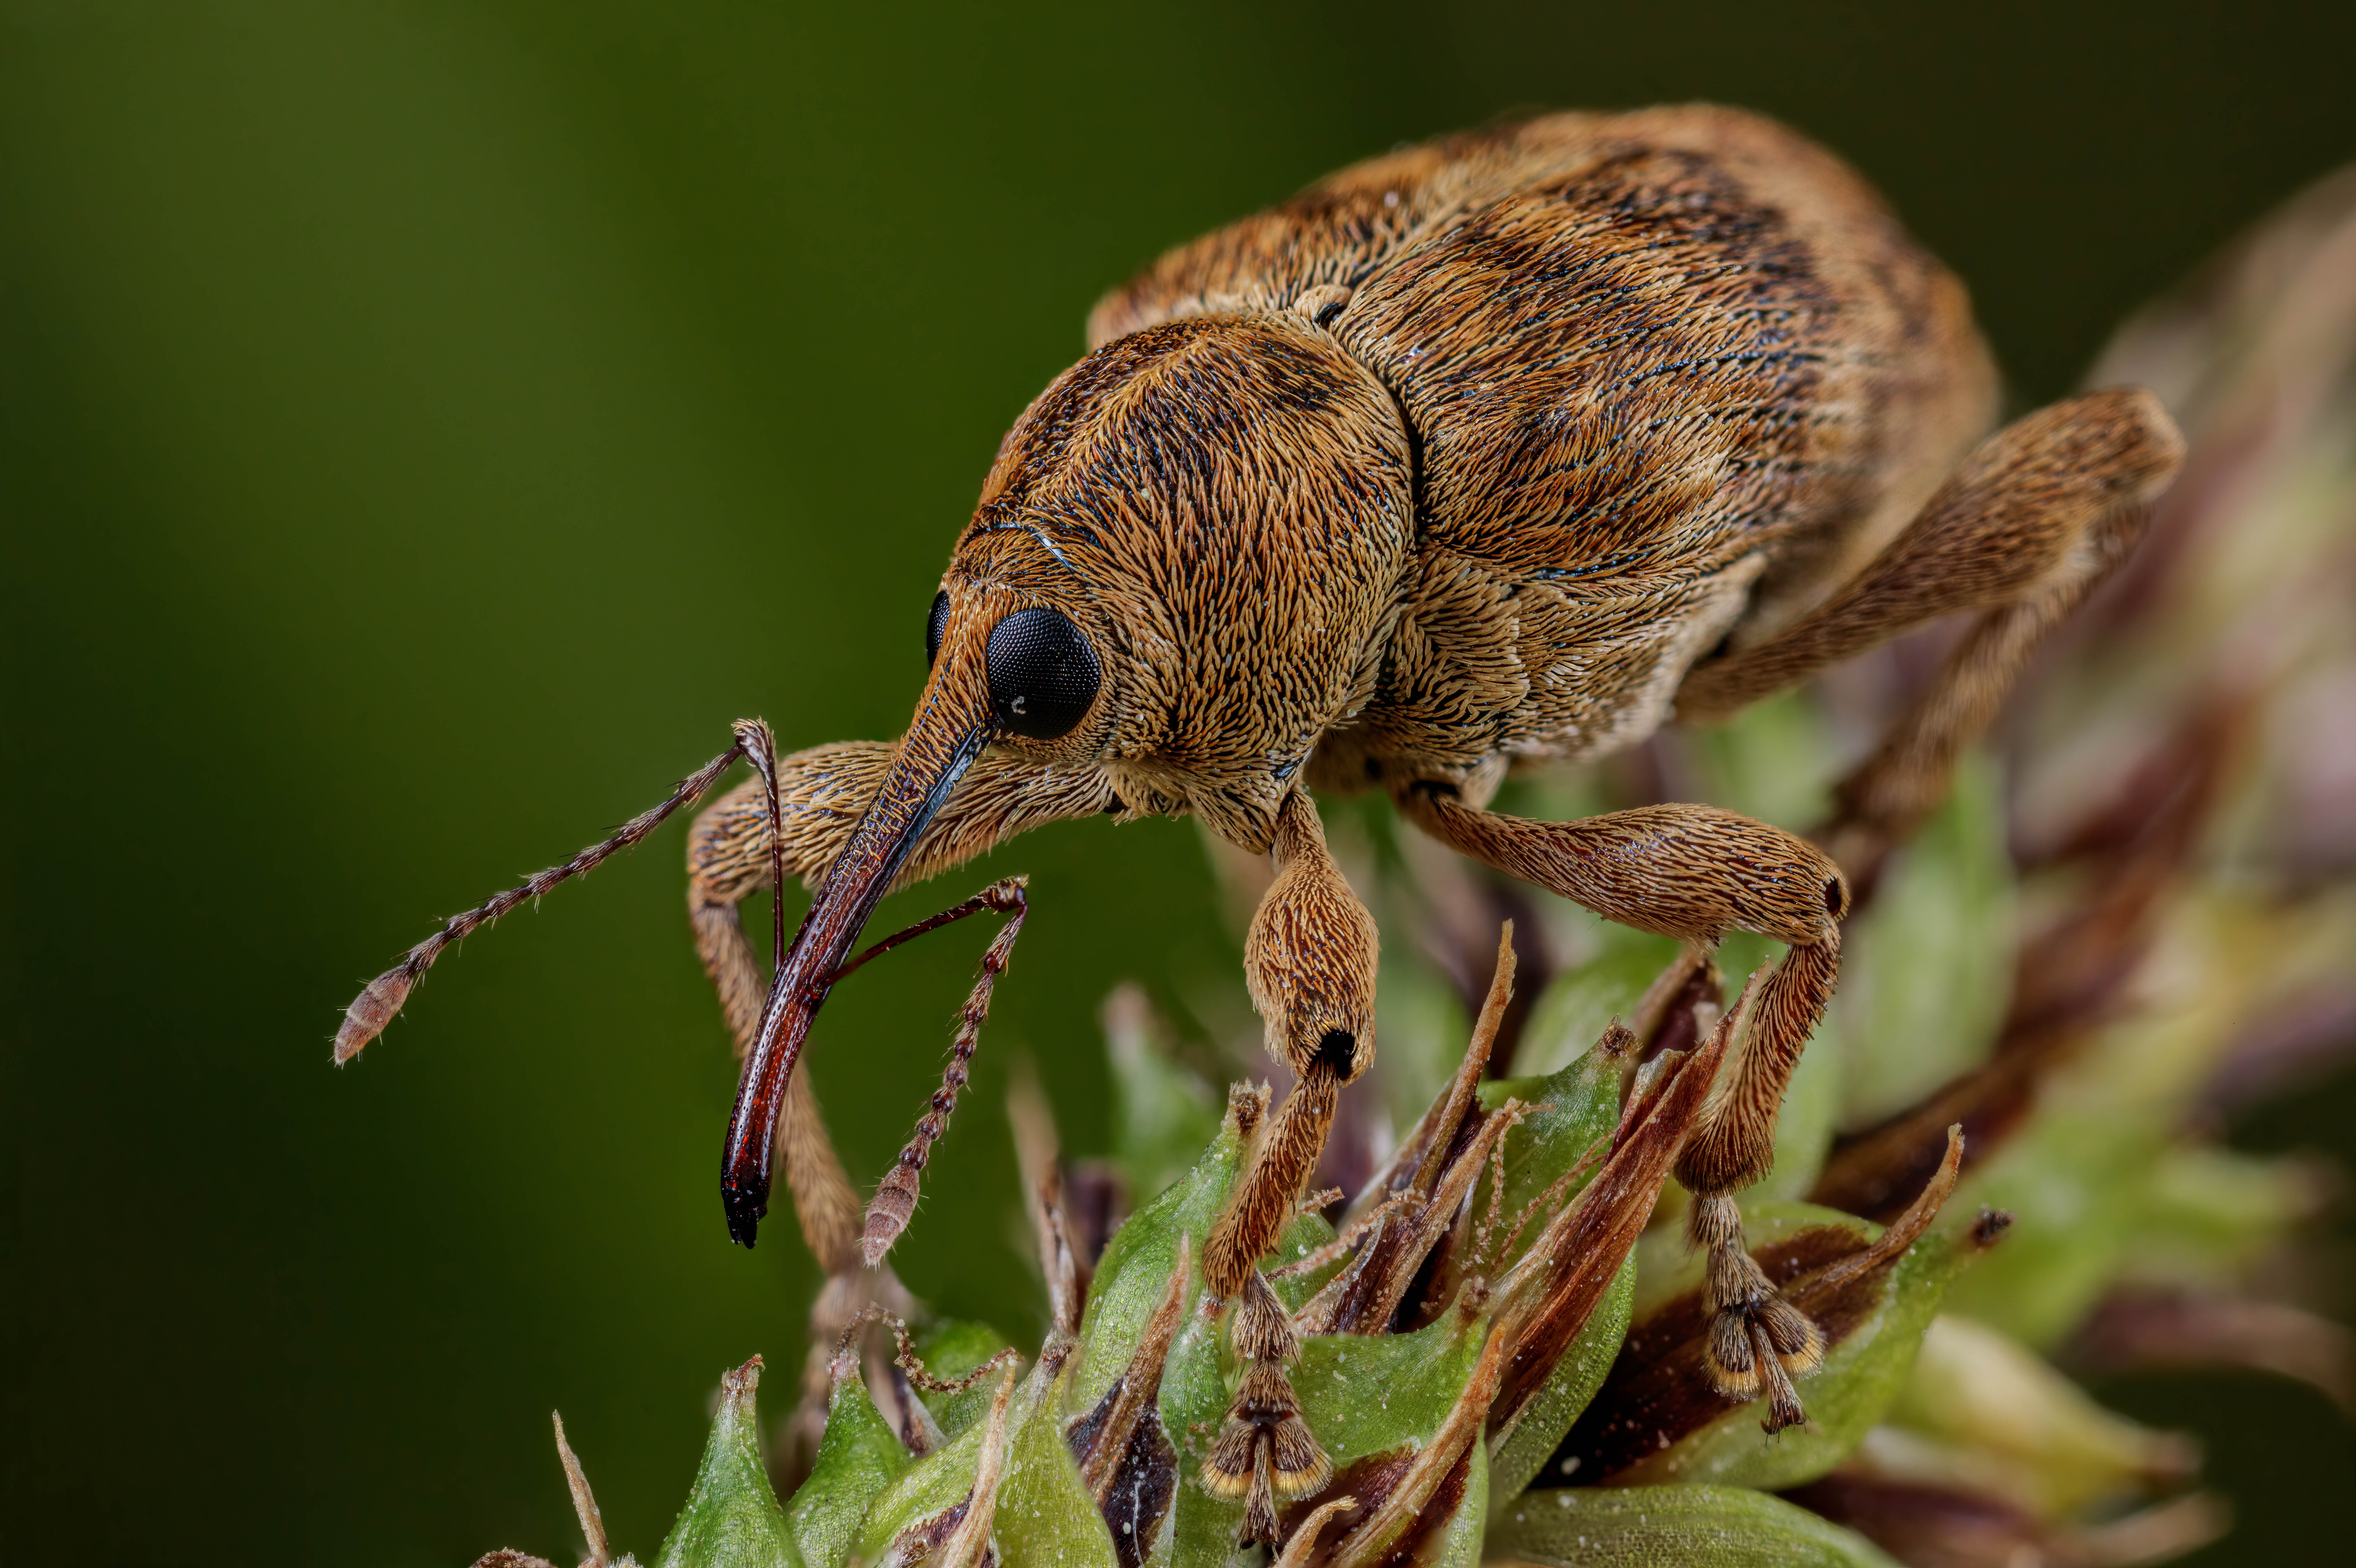 Acorn and Nut Weevil, Curculio sp., on a type of foxtail grass seed head